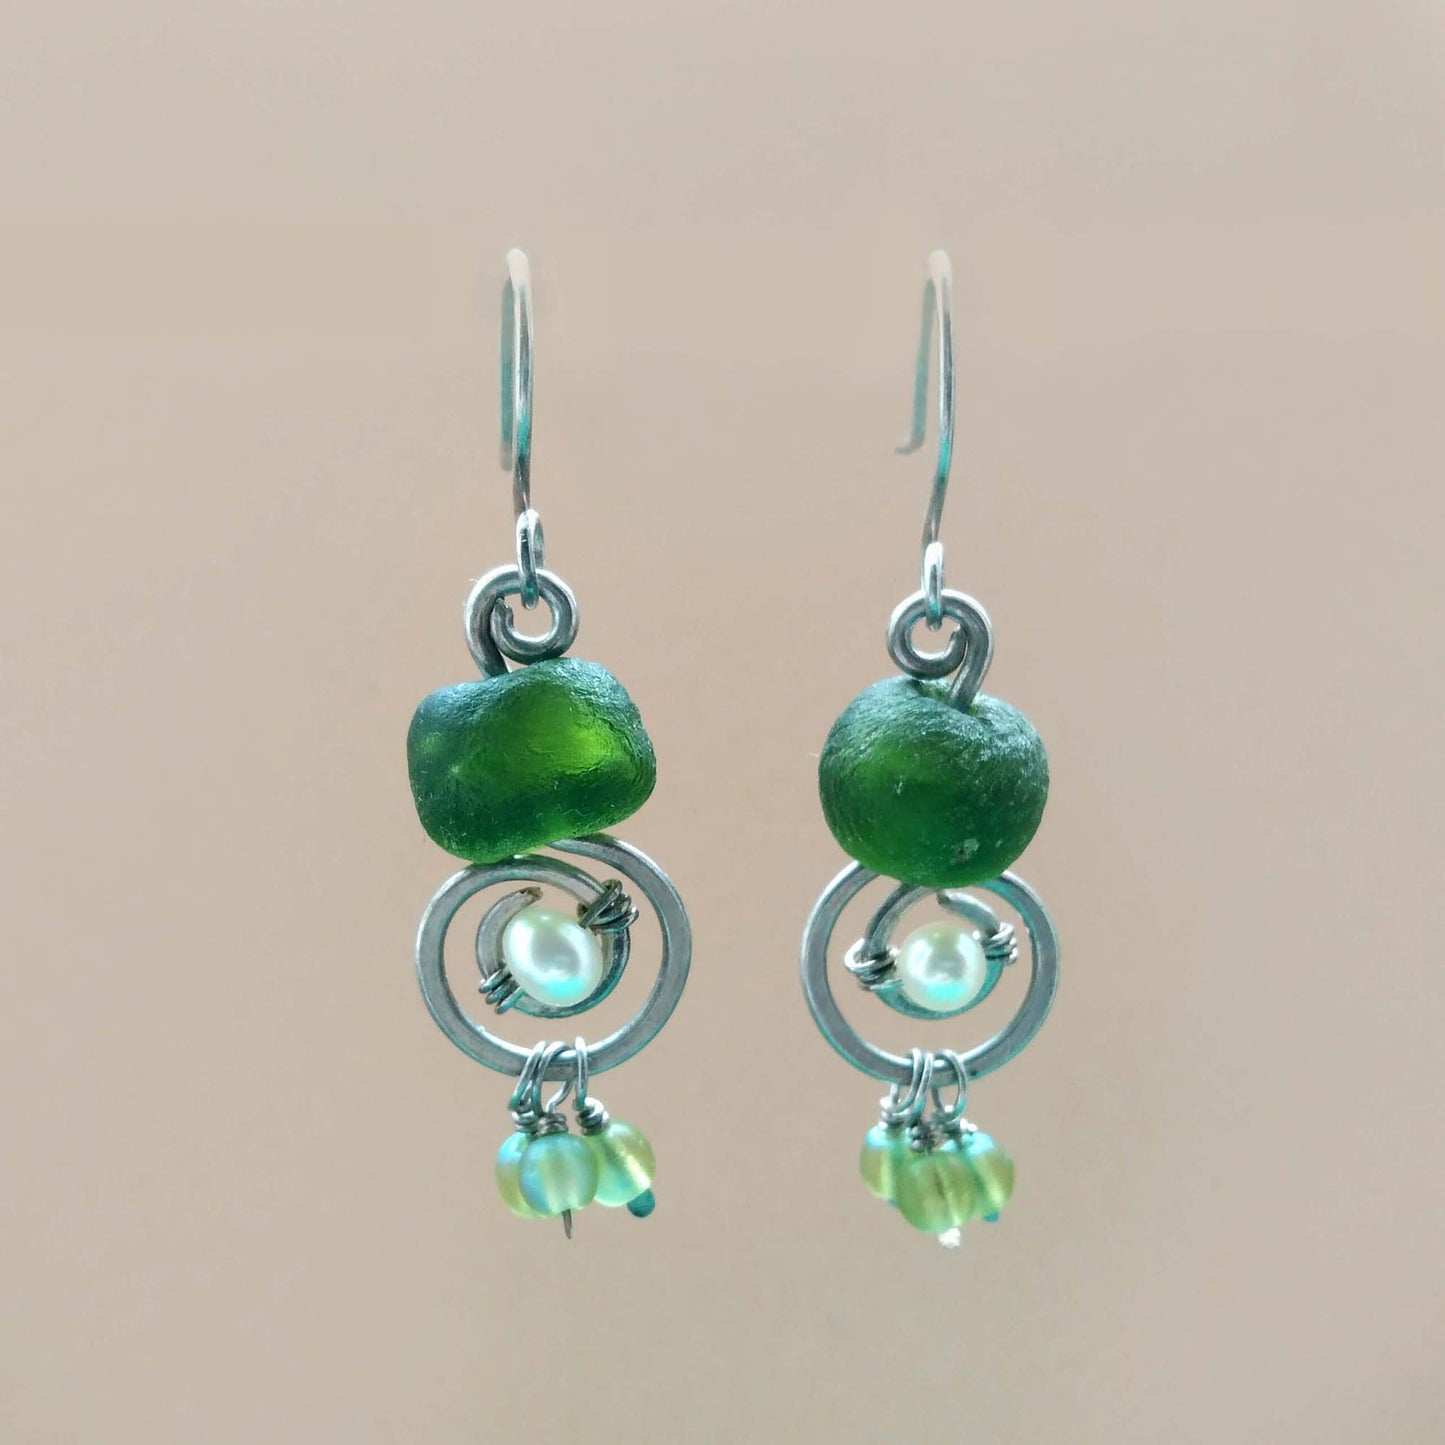 Ancient Roman Green Glass Earrings with  Freshwater Pearls, Sterling Silver Spiral Unique Artisan Jewelry, Exclusive design